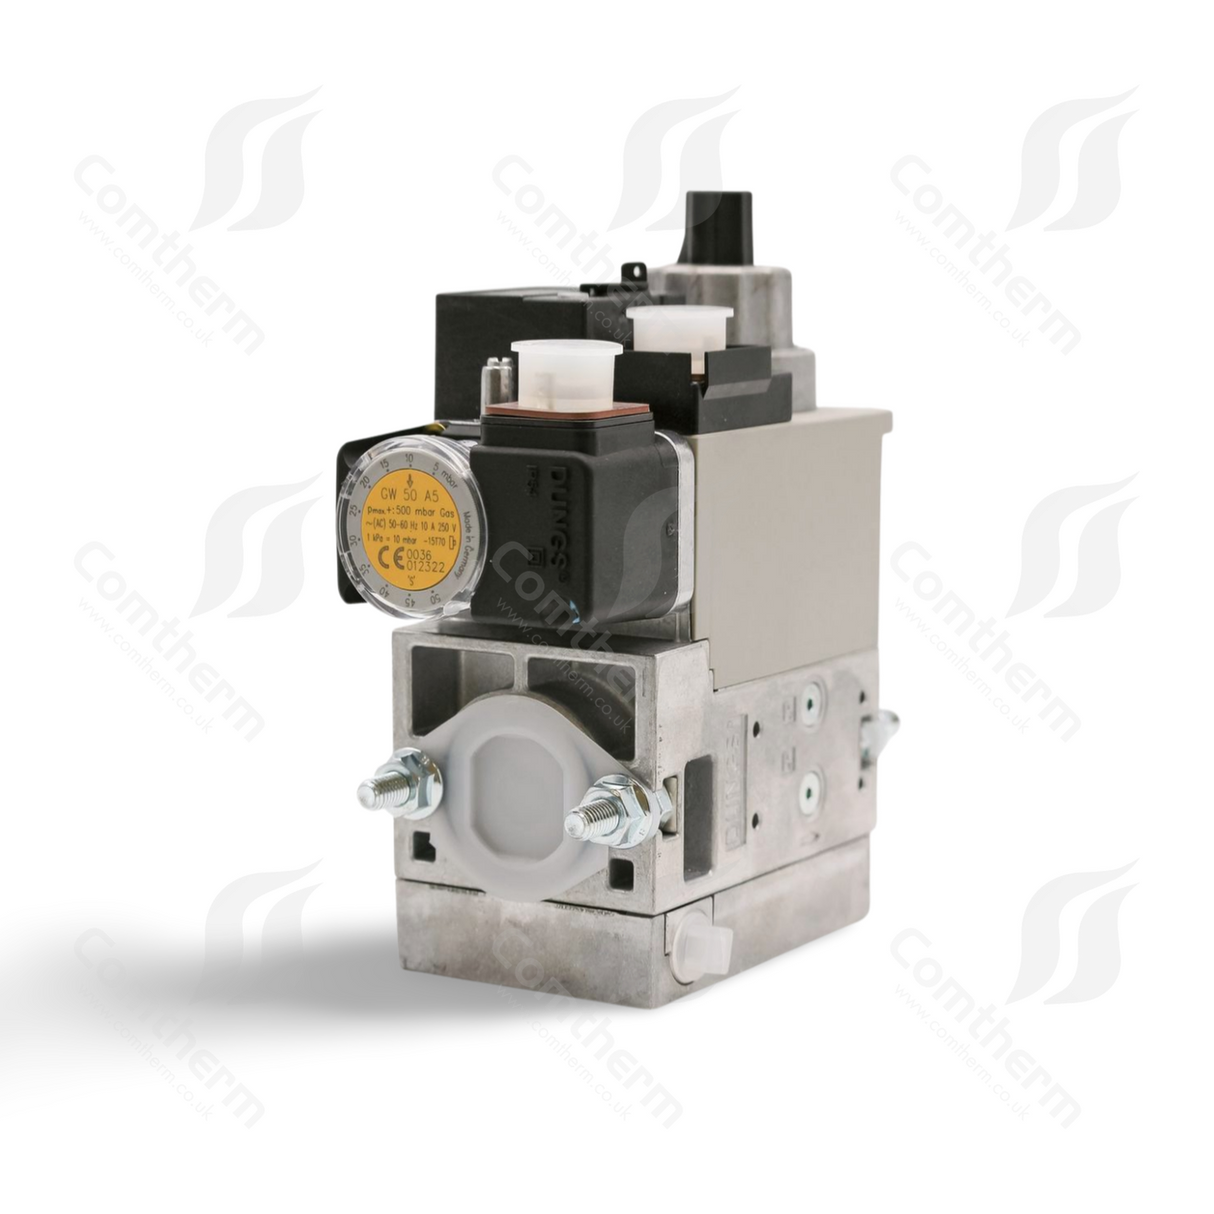 Dungs MB-DLE 407 B01 S20 + GW50A5 Multibloc Gas Valve - 230v